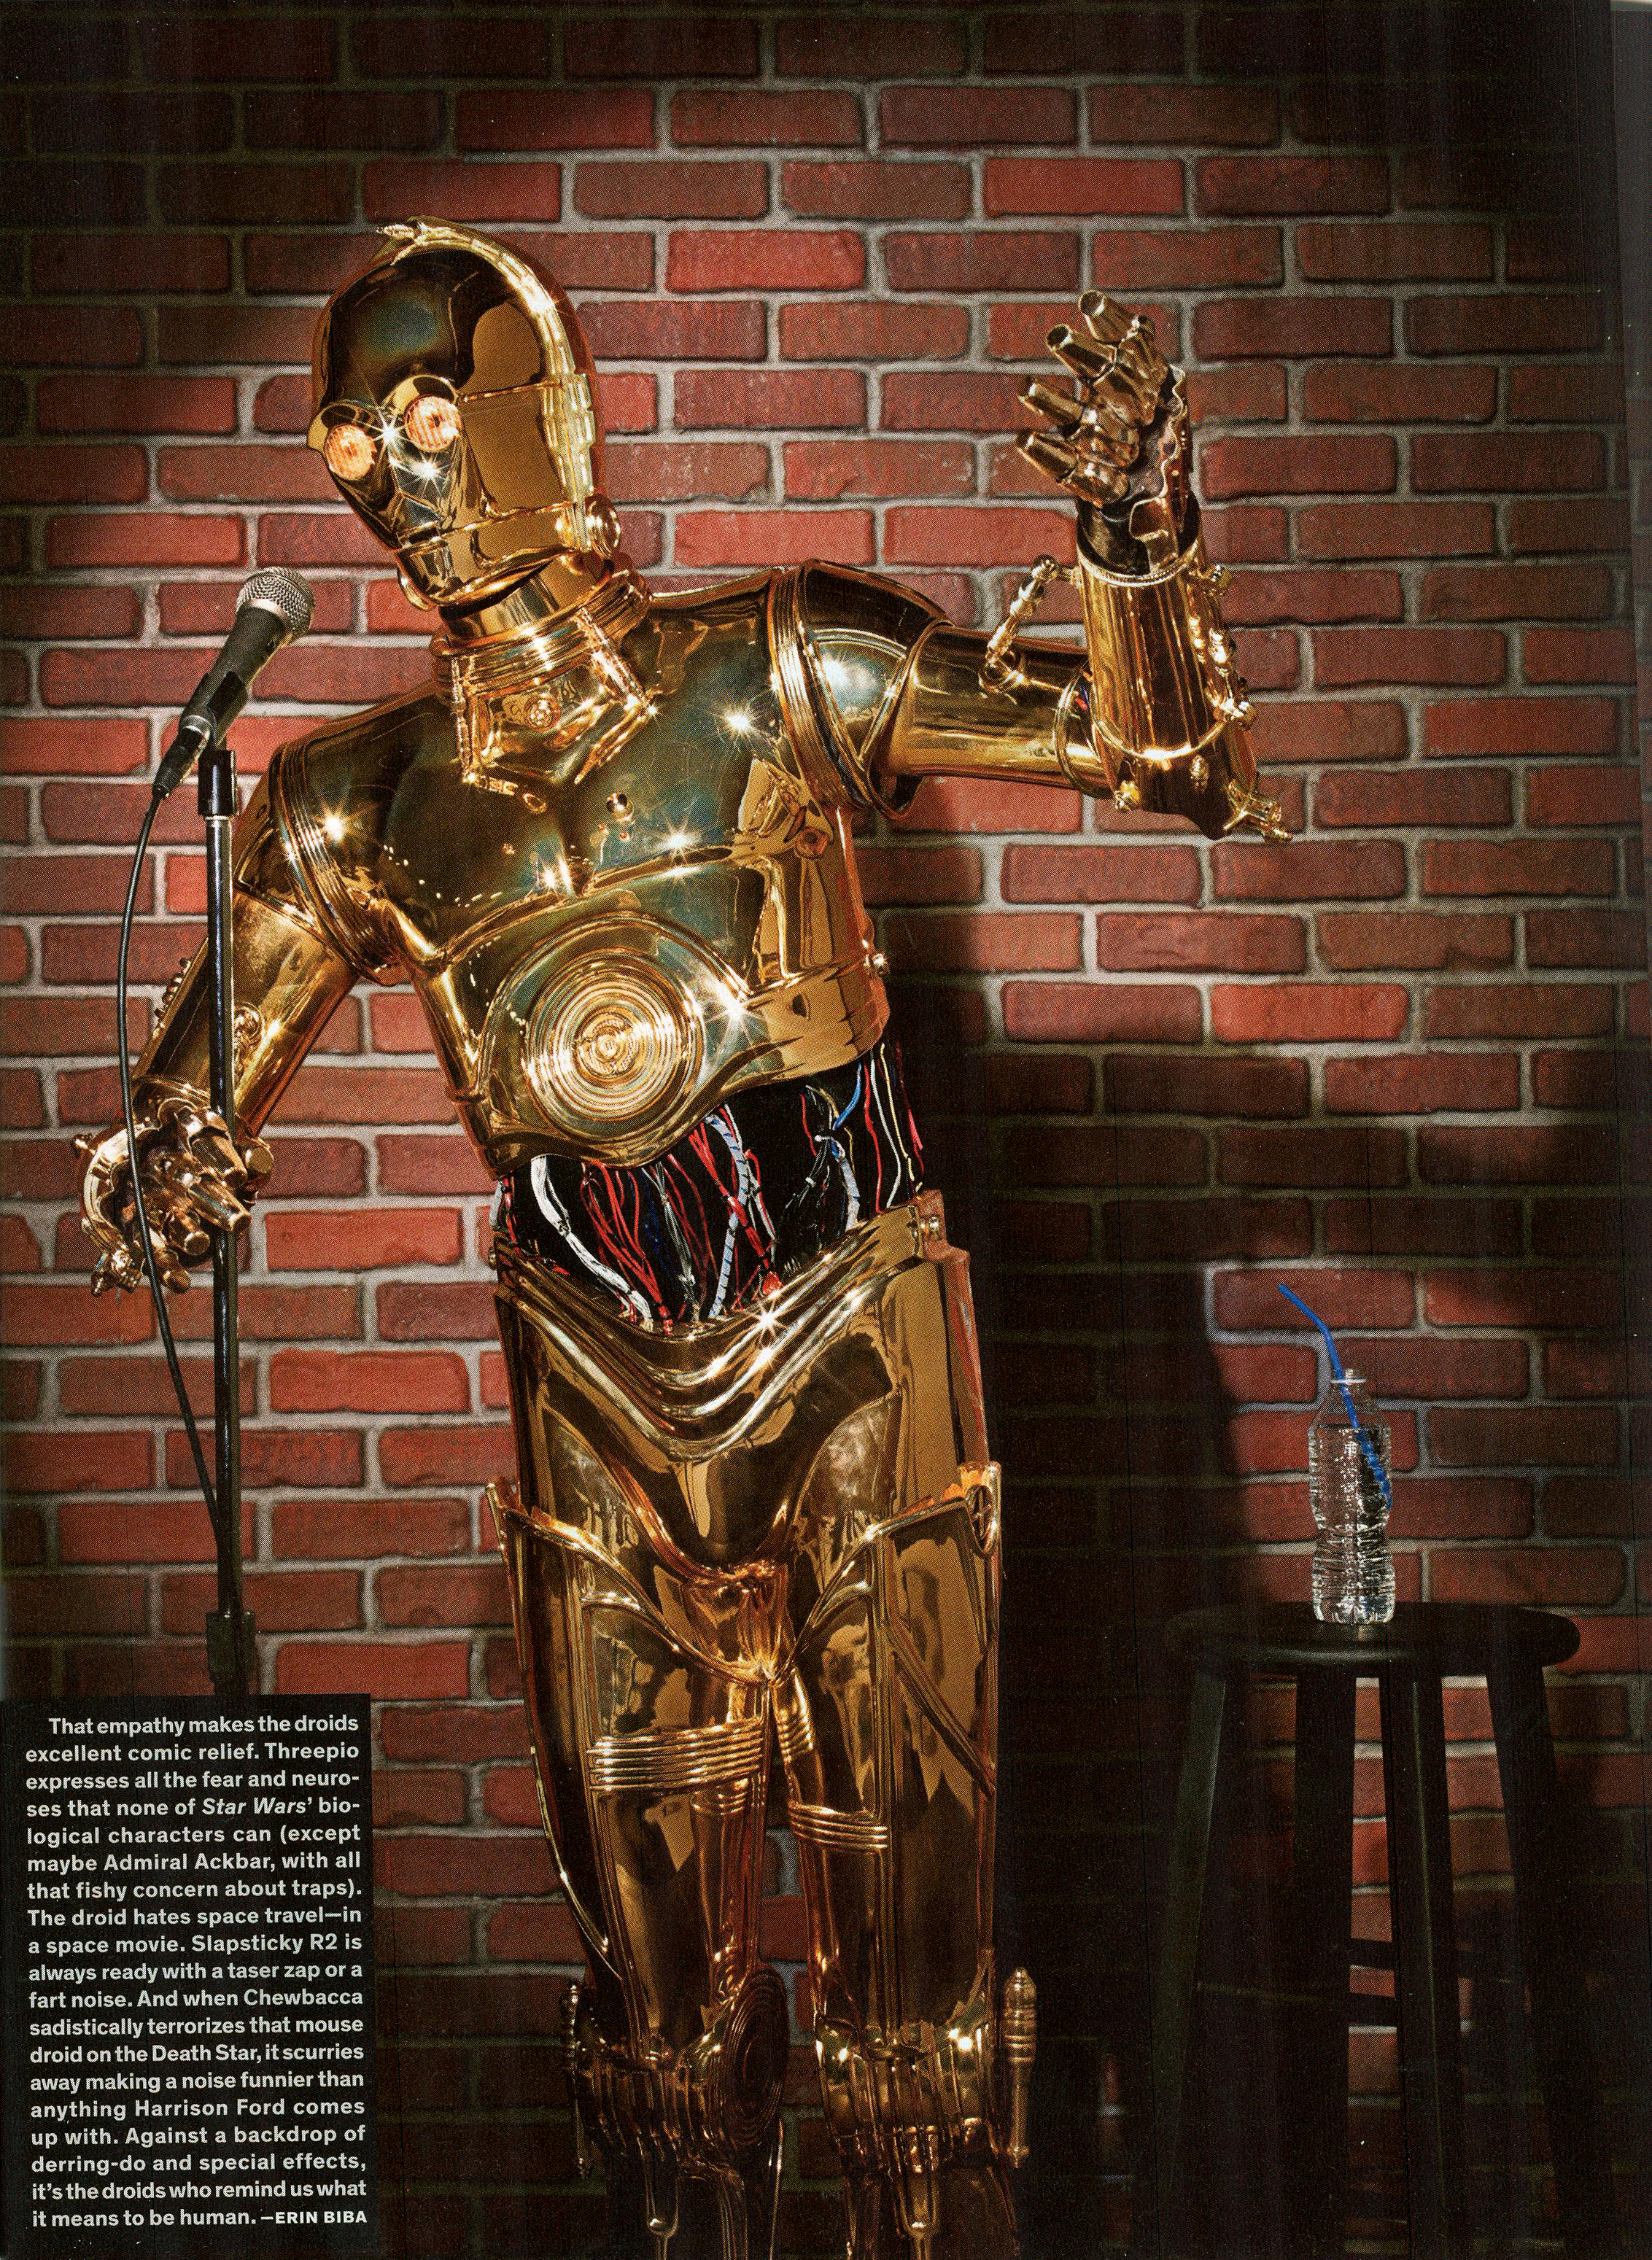 Chris F. Bartlett as C-3PO for the March 2013 issue of Wired Magazine's Star Wars issue